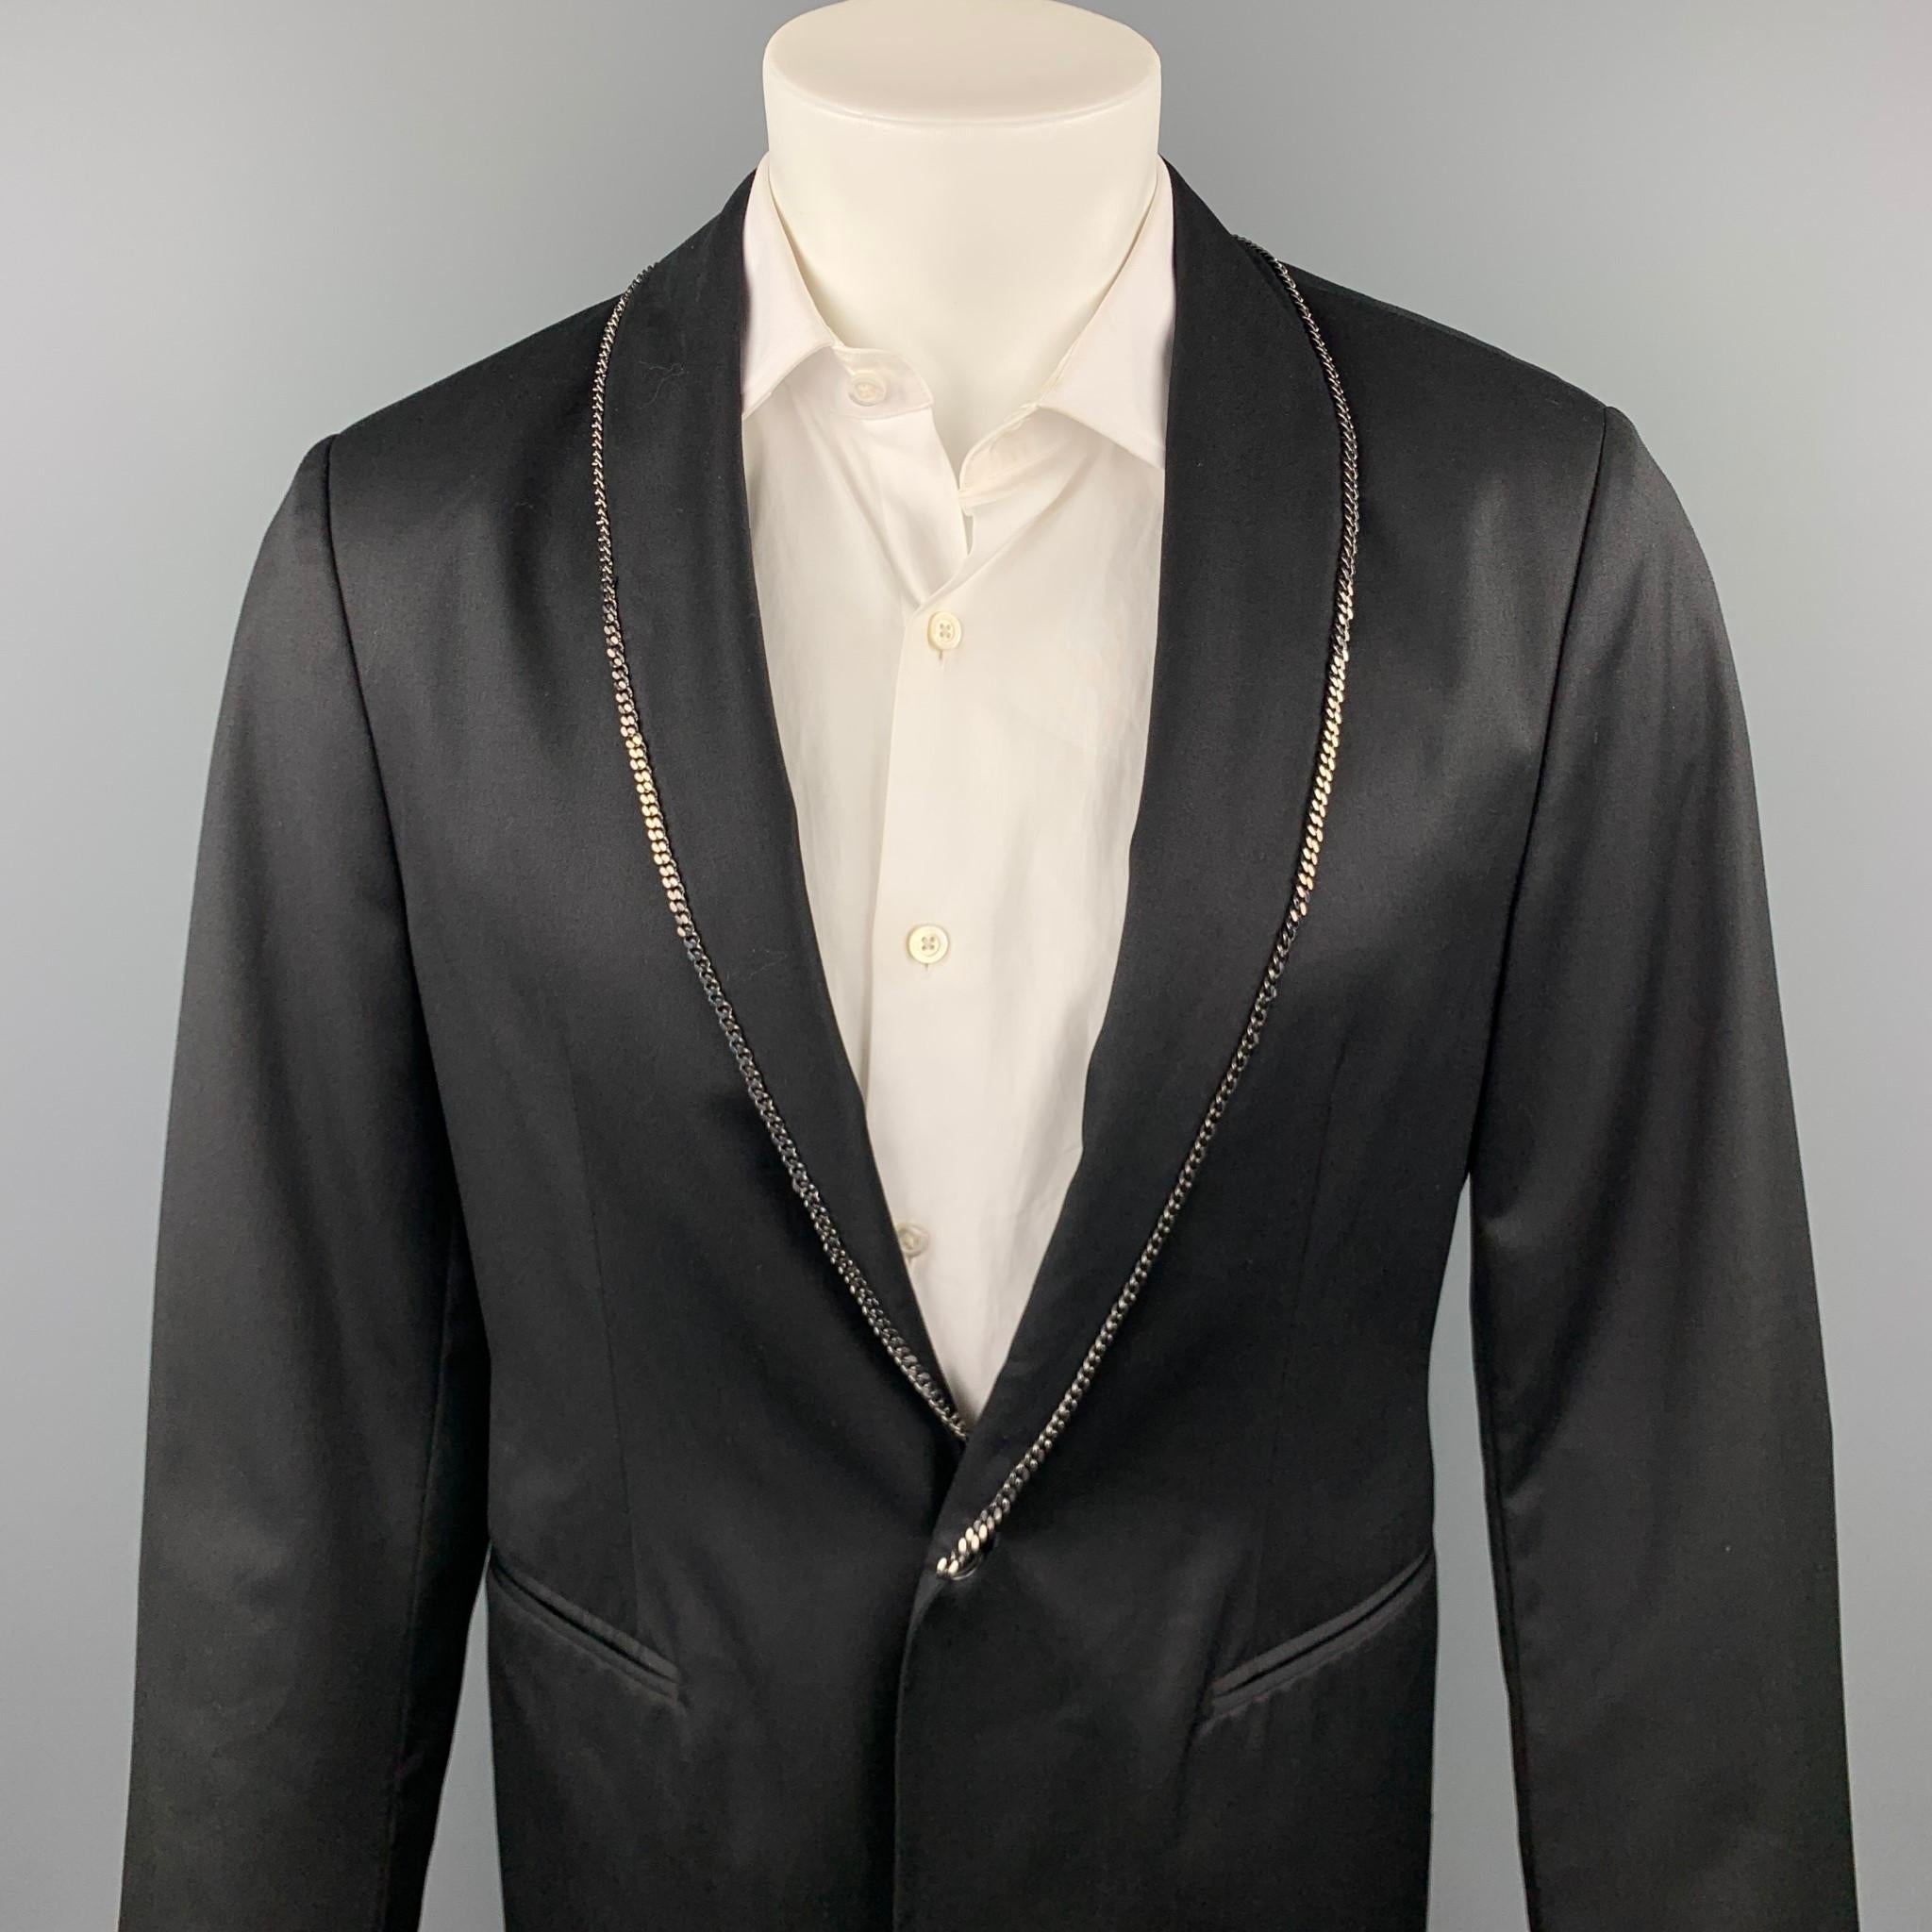 JOHN VARVATOS sport coat comes in a black wool with a half liner featuring a shawl collar, chain trim, slit pockets, and a single button closure. Made in Italy.

Very Good Pre-Owned Condition.
Marked: IT 48

Measurements:

Shoulder: 18 in. 
Chest: